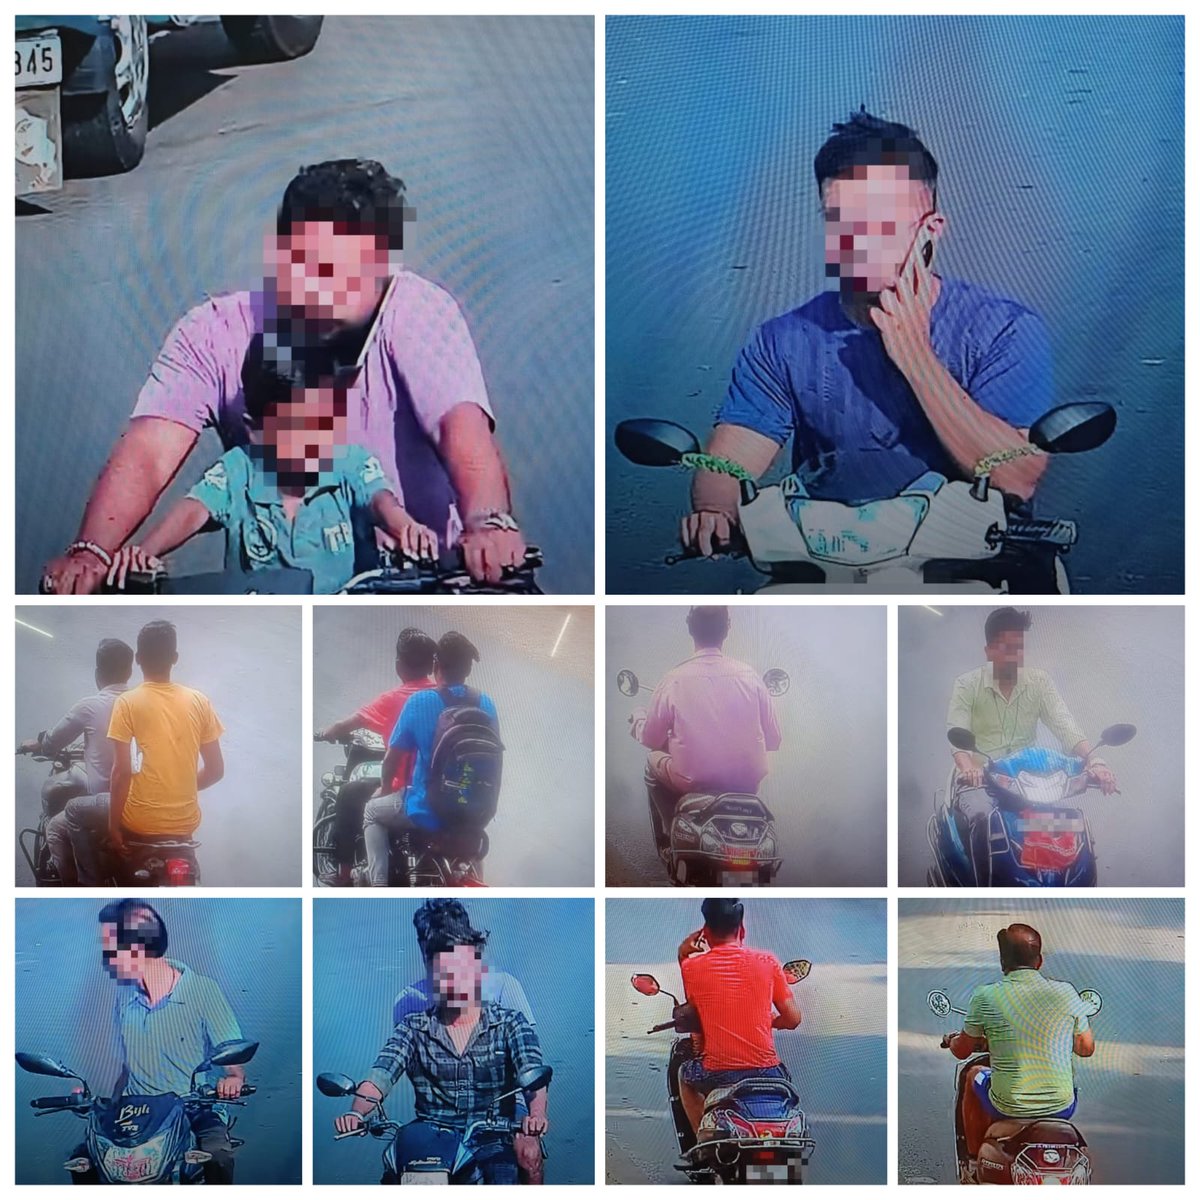 Follow the traffic rules, save your life # 174 vehicles have been fined in Rs.1,93,000/- for triple riding on M/C, with out helmet & using mobile while driving in last 24 hrs by using #CCTV installed in #Koraput_Town. #Observe Traffic Rules. @STAOdisha @DGPOdisha @digswrkoraput